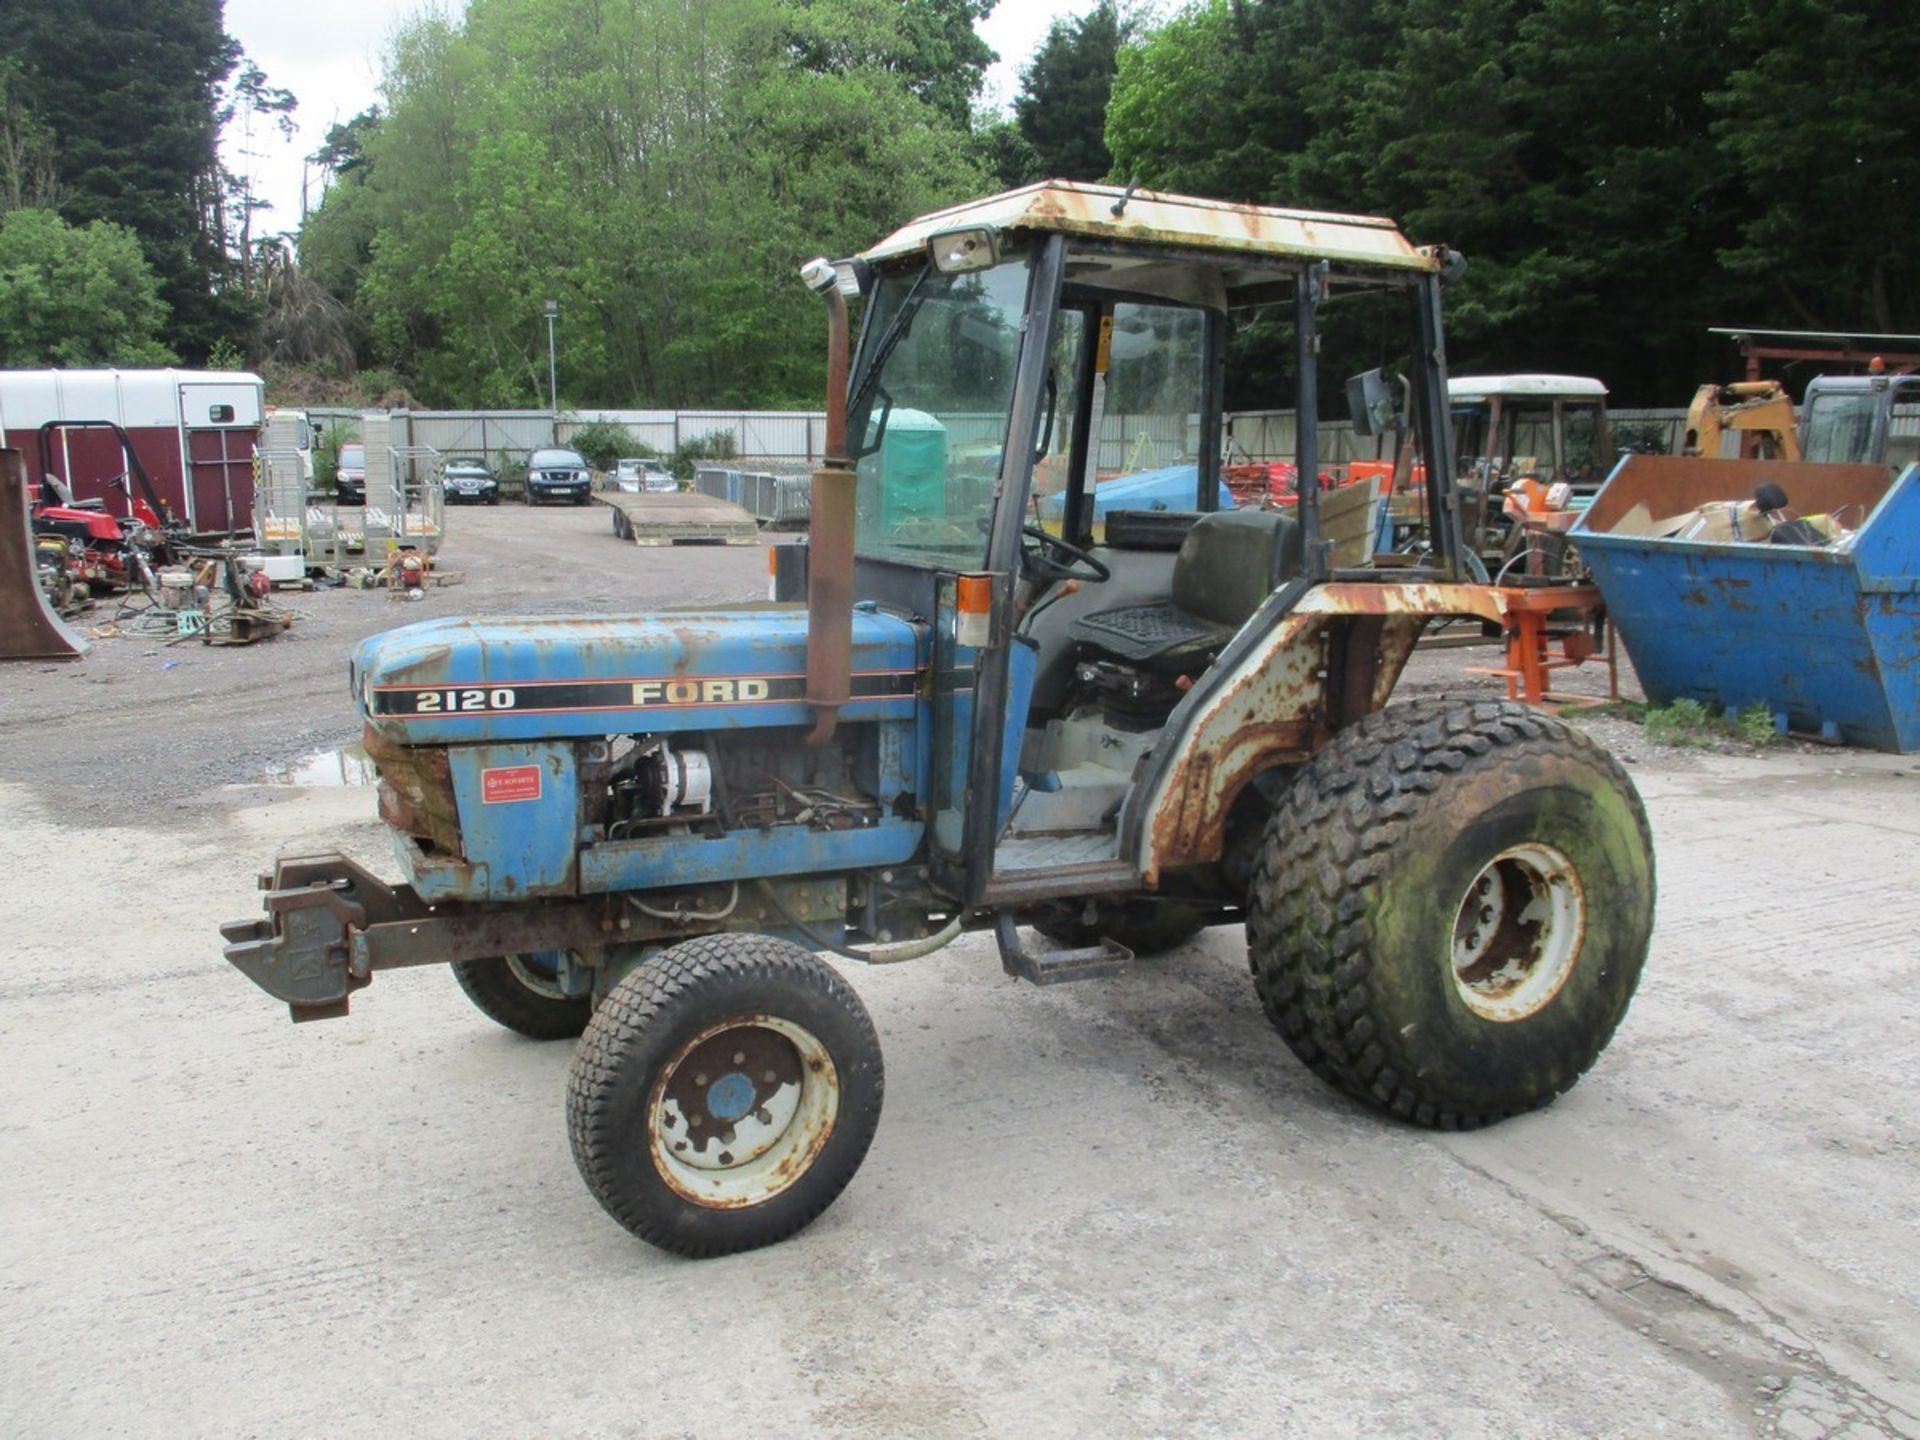 FORD 2120 40HP TRACTOR (NON RUNNER BEEN SAT A WHILE)